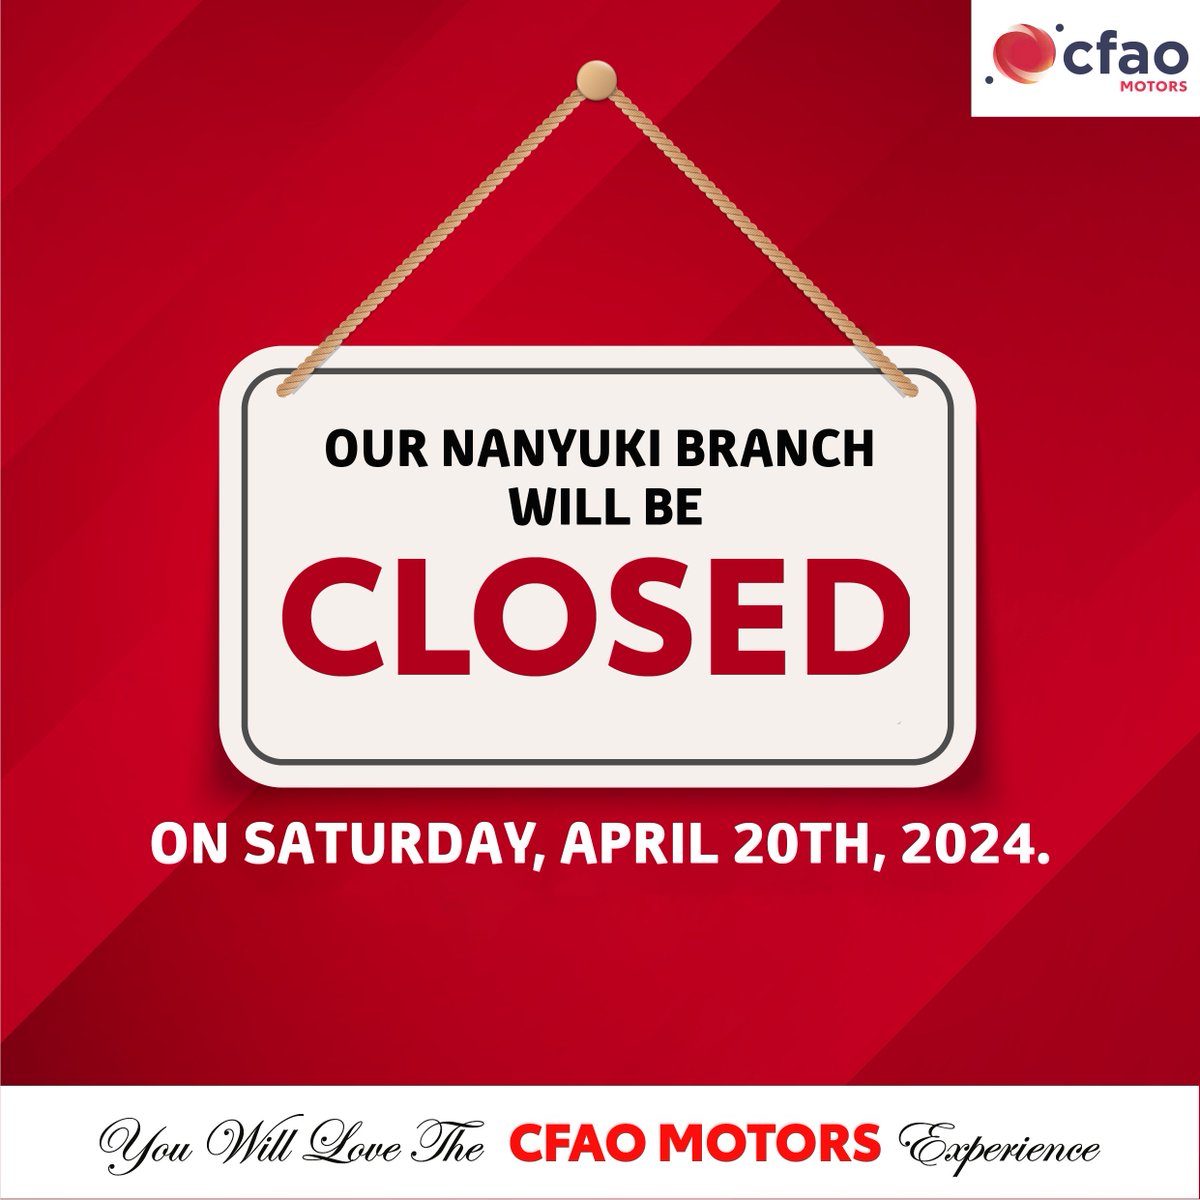 Dear valued customer, Please be informed - CFAO Motors Nanyuki Branch will remain closed on Saturday, April 20th, 2024. We apologize for any inconvenience caused. Normal operations will resume on Monday, April 22nd, 2024. Thank you for your understanding. #CFAOMotorsDrivesKenya